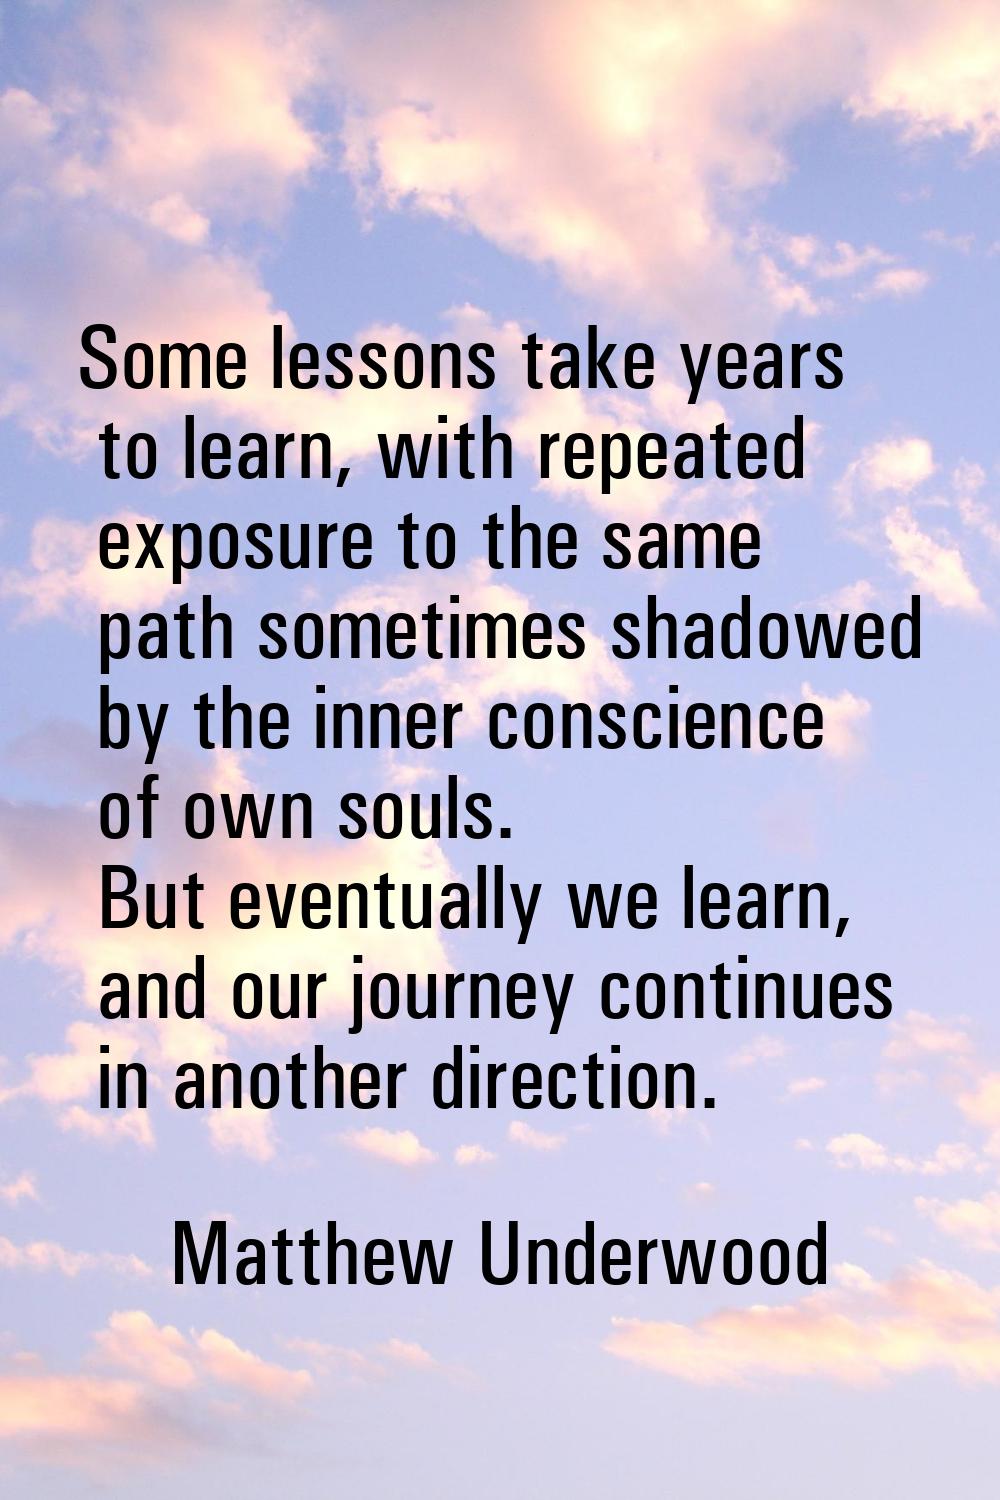 Some lessons take years to learn, with repeated exposure to the same path sometimes shadowed by the